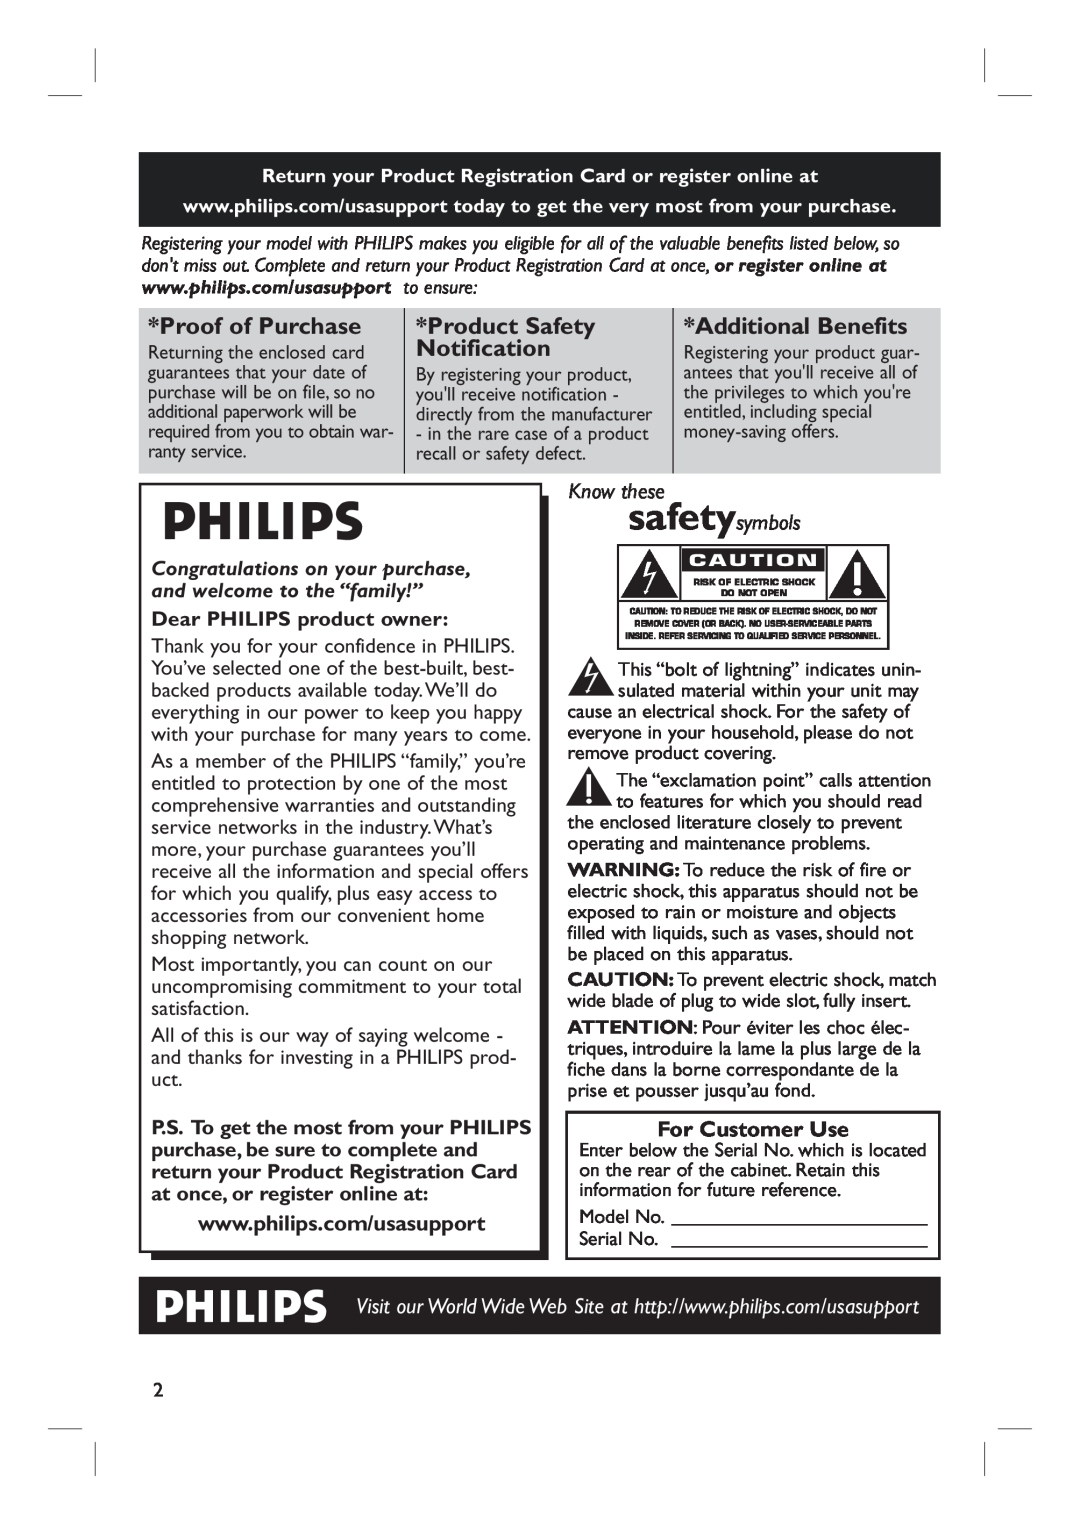 Philips HTS3440, HTS3450 user manual Proof of Purchase, Product Safety Notification, Additional Benefits, For Customer Use 